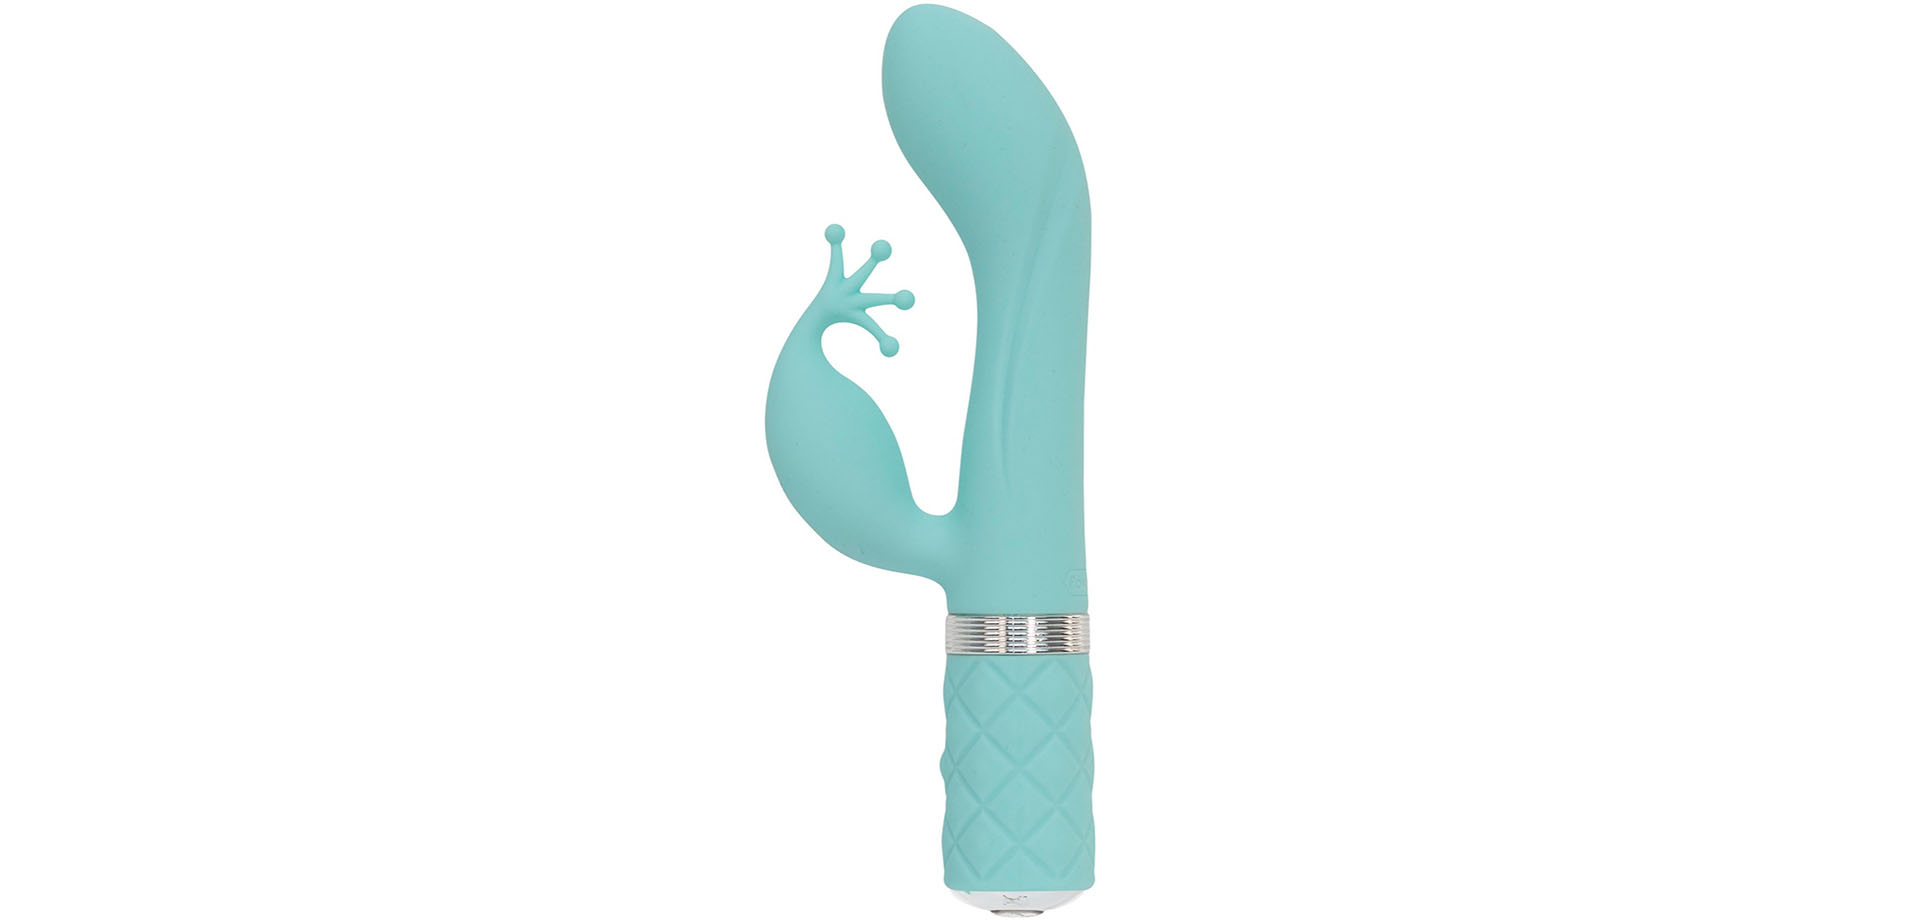 Vibrator for clitoral and g-spot stimulation.